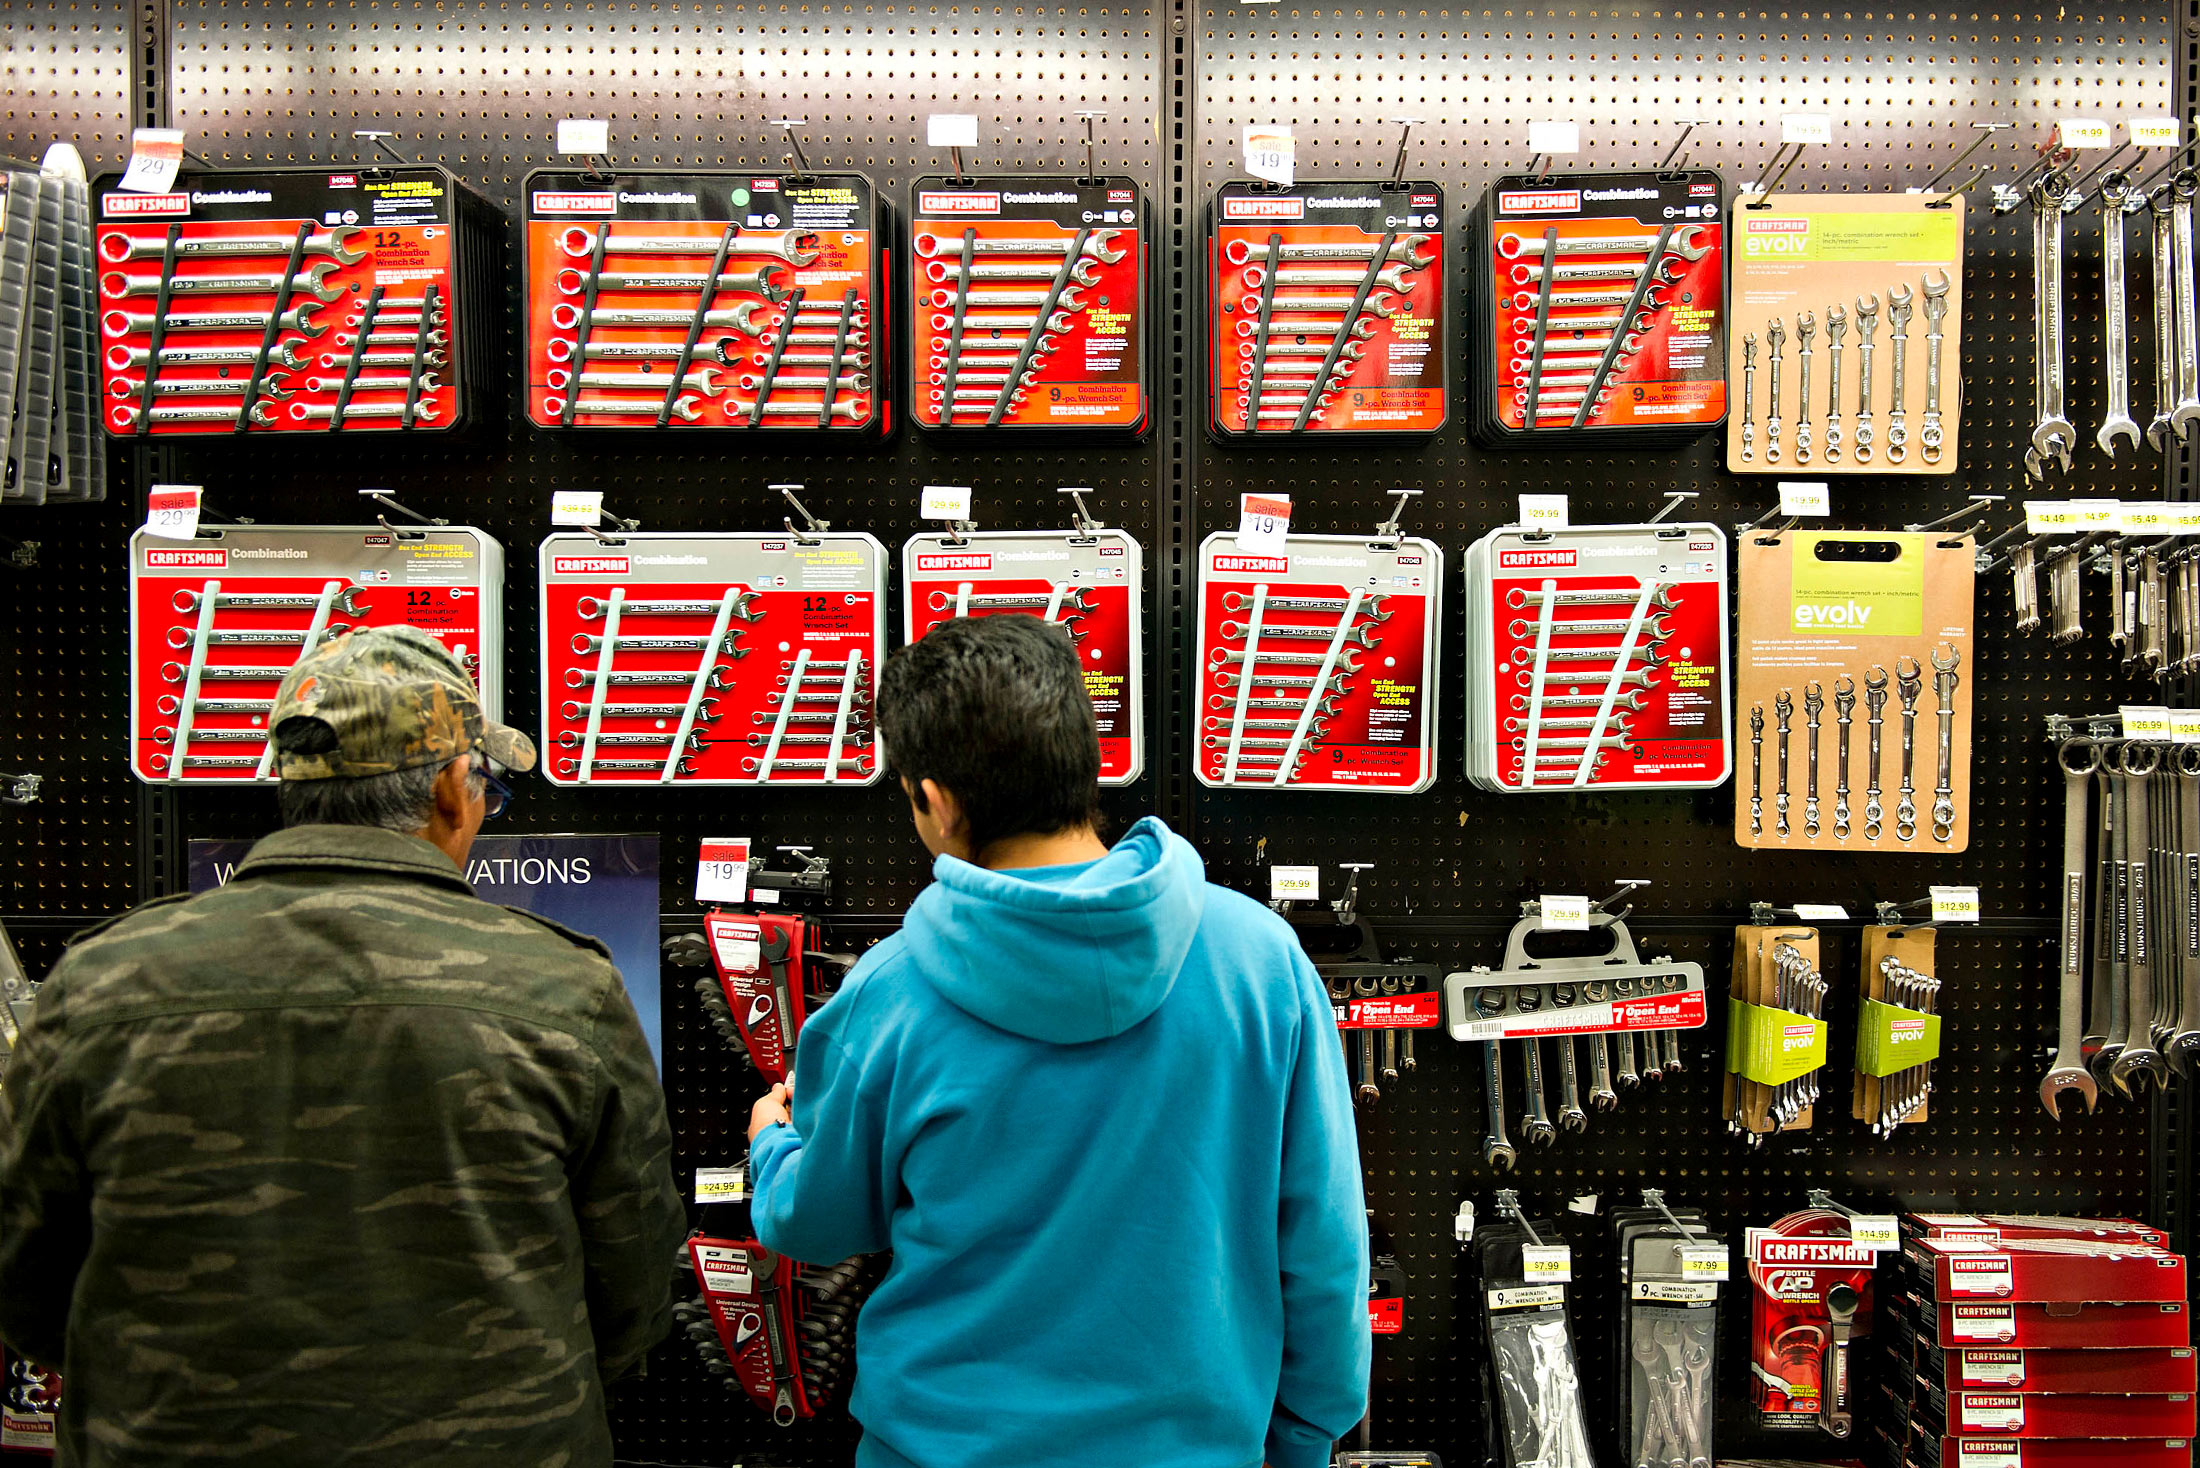 Shoppers look over Craftsman tools in a Sears store.
